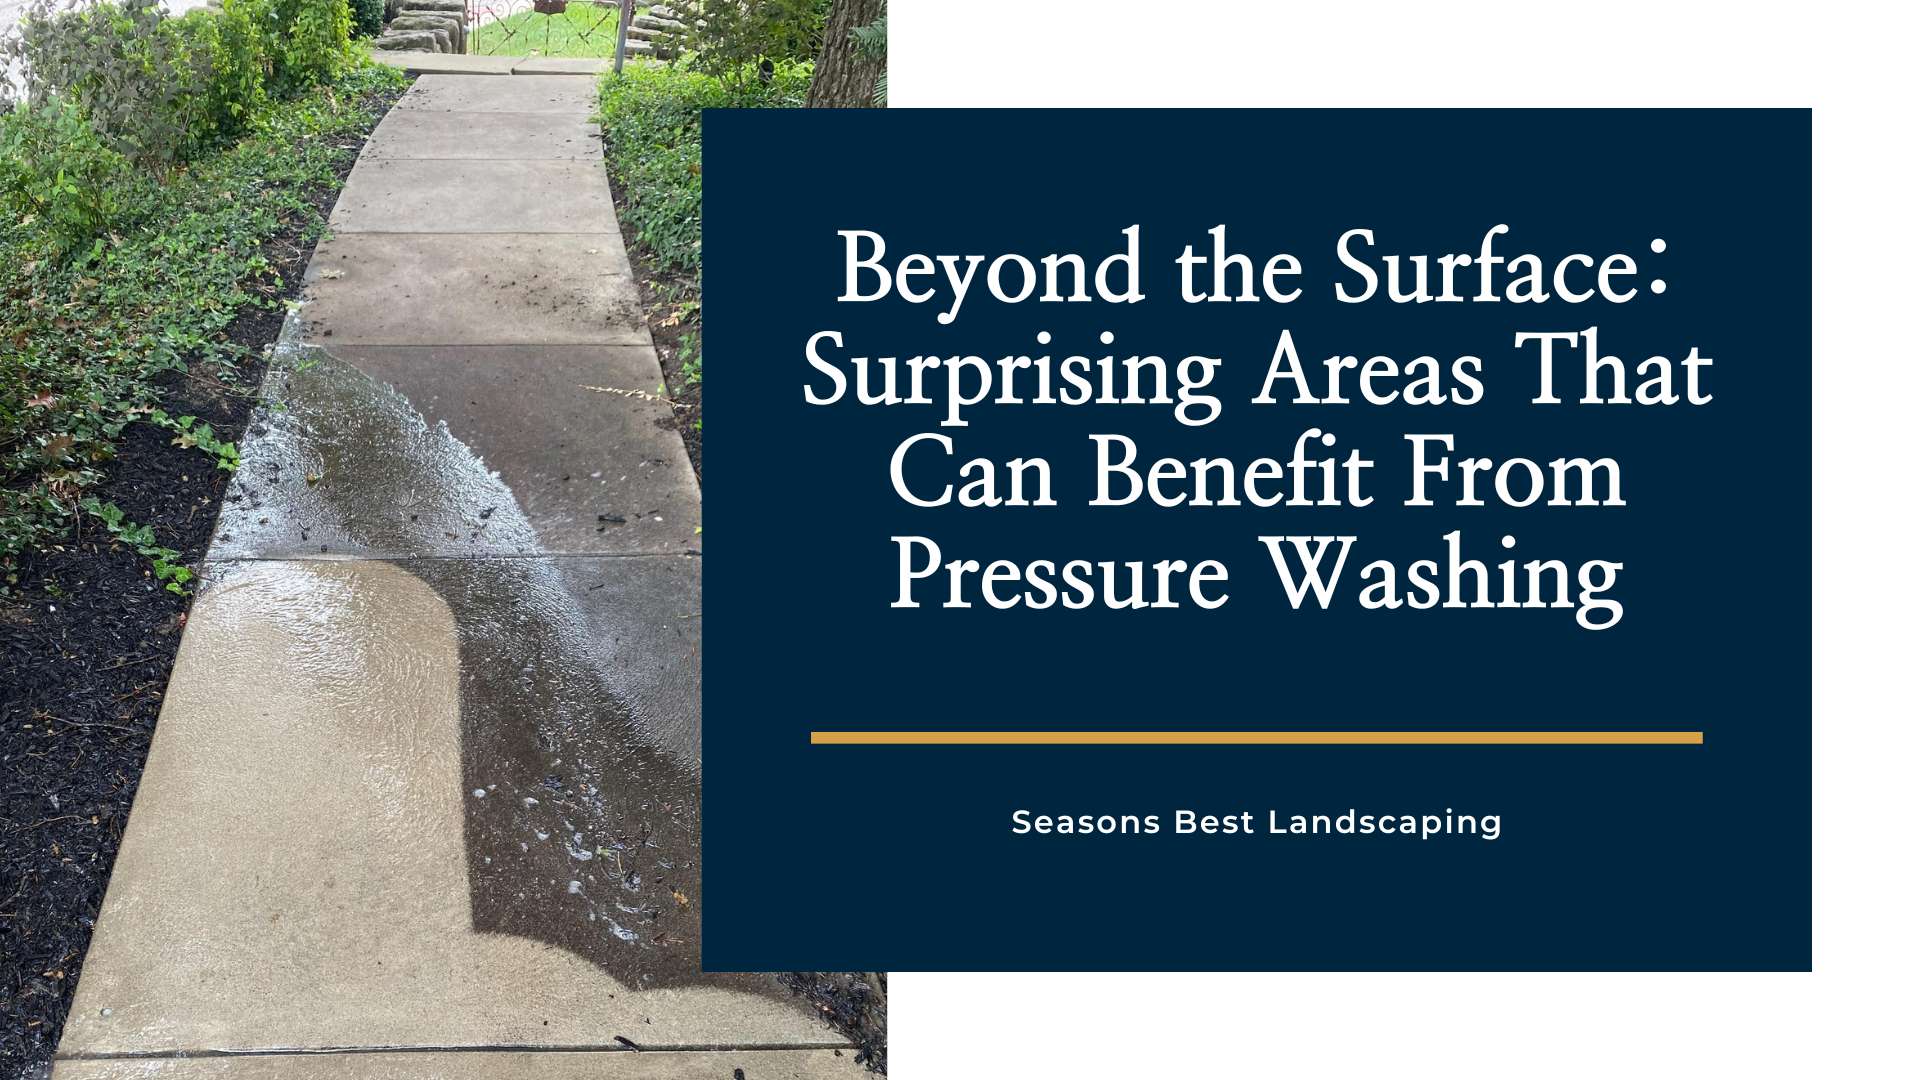 Surprising and Uncommon Areas for Pressure Washing